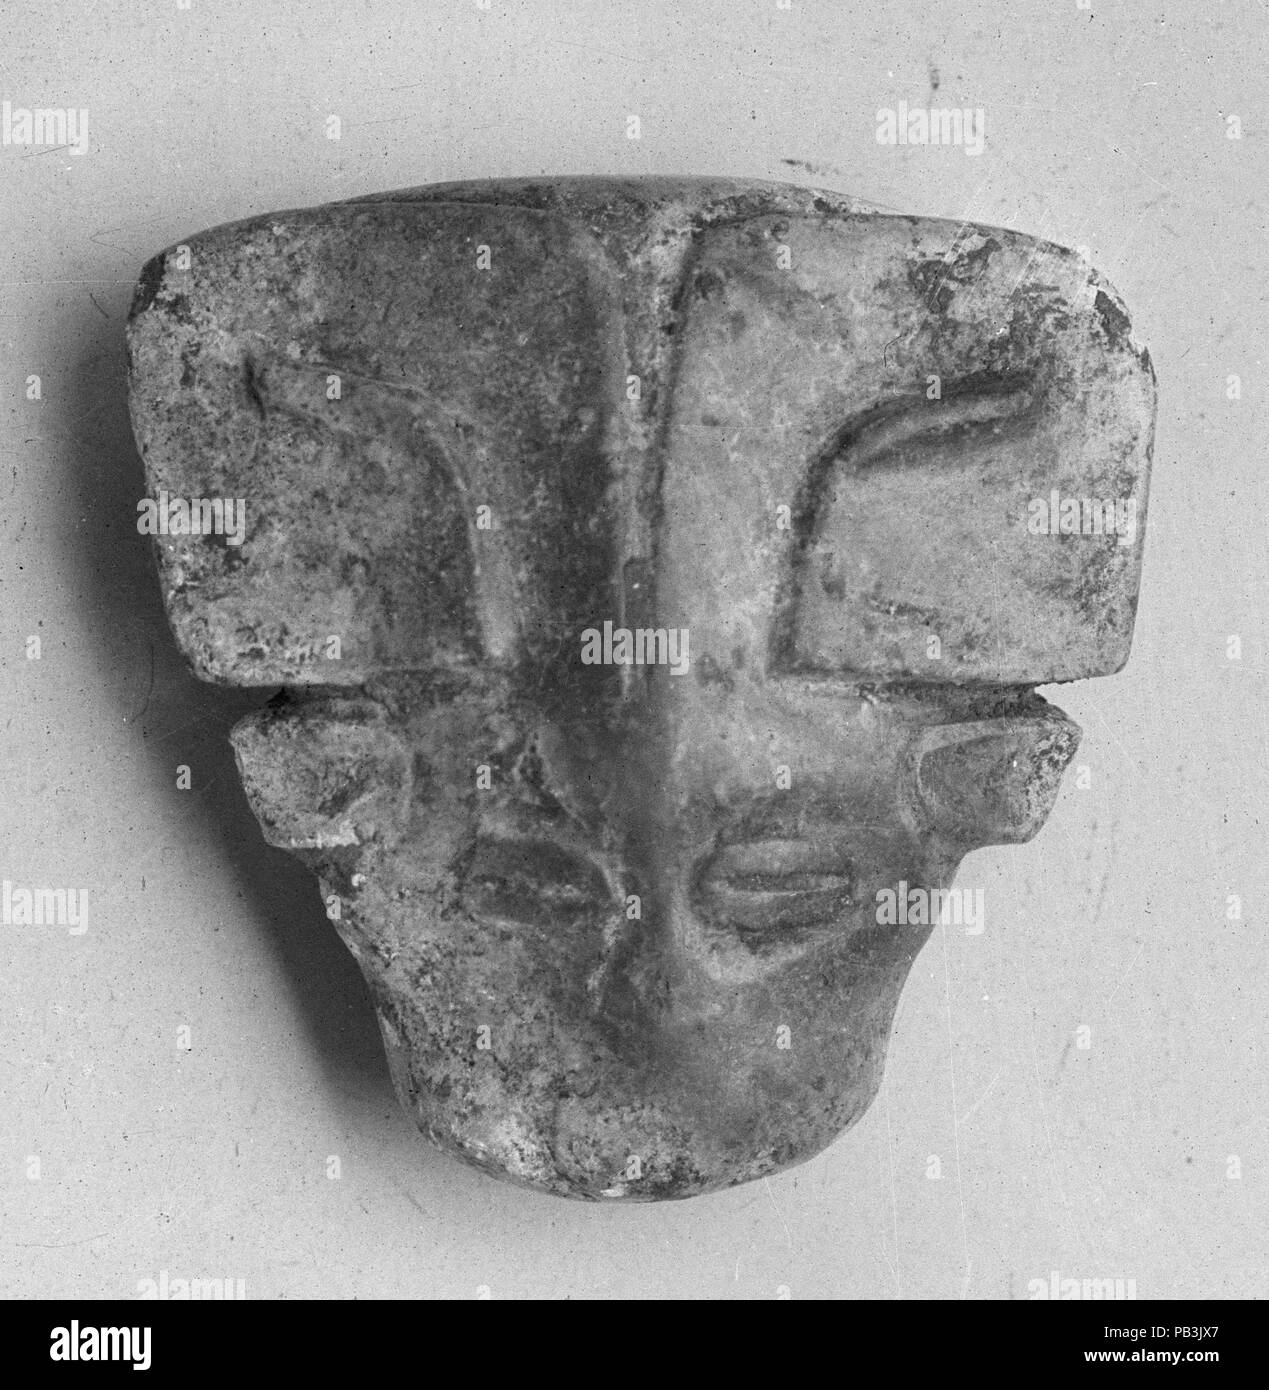 Plaque in the Shape of an Animal Head. Culture: China. Dimensions: H. 1 1/4 in. (3.2 cm); W. 1 1/4 in. (3.2 cm). Date: 11th-10th century B.C.. Museum: Metropolitan Museum of Art, New York, USA. Stock Photo